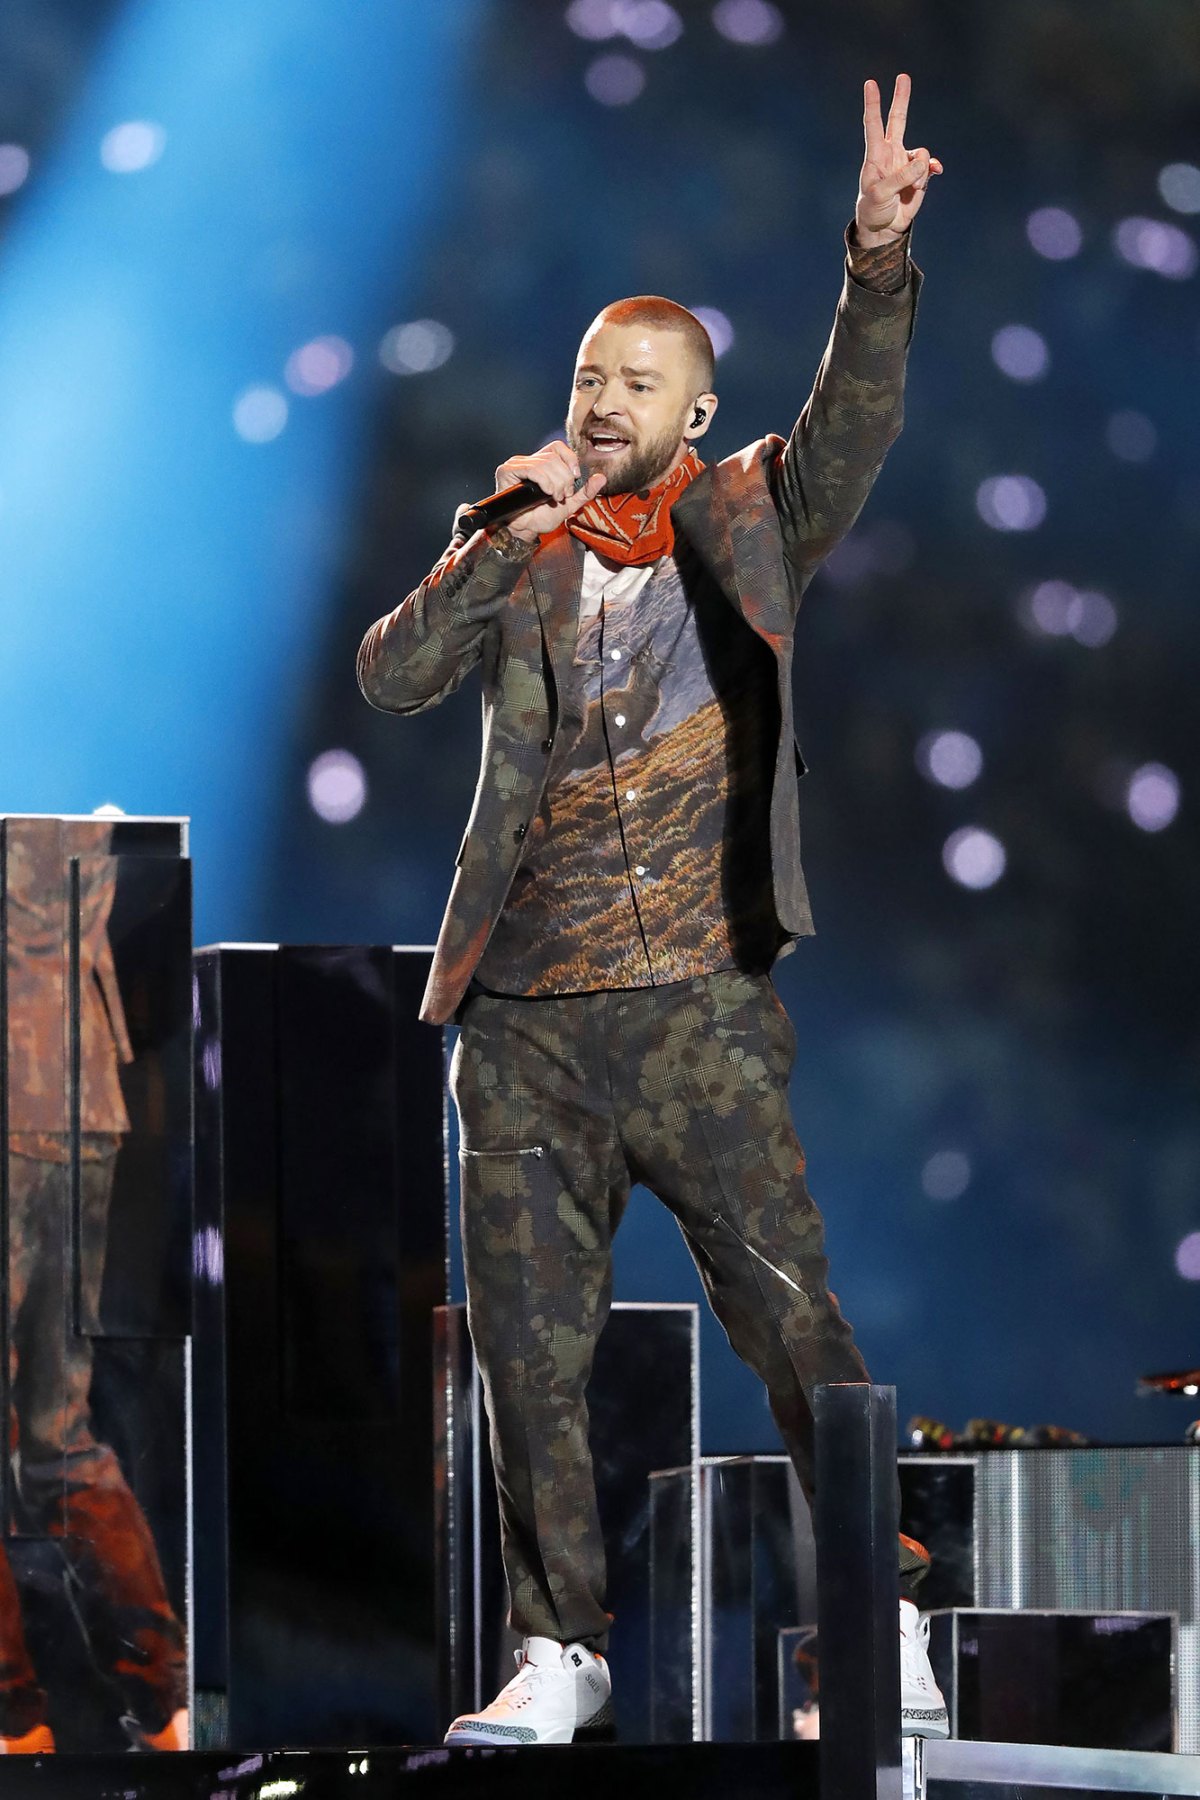 Justin Timberlake Through the Years: From ‘NSync to Solo Artist